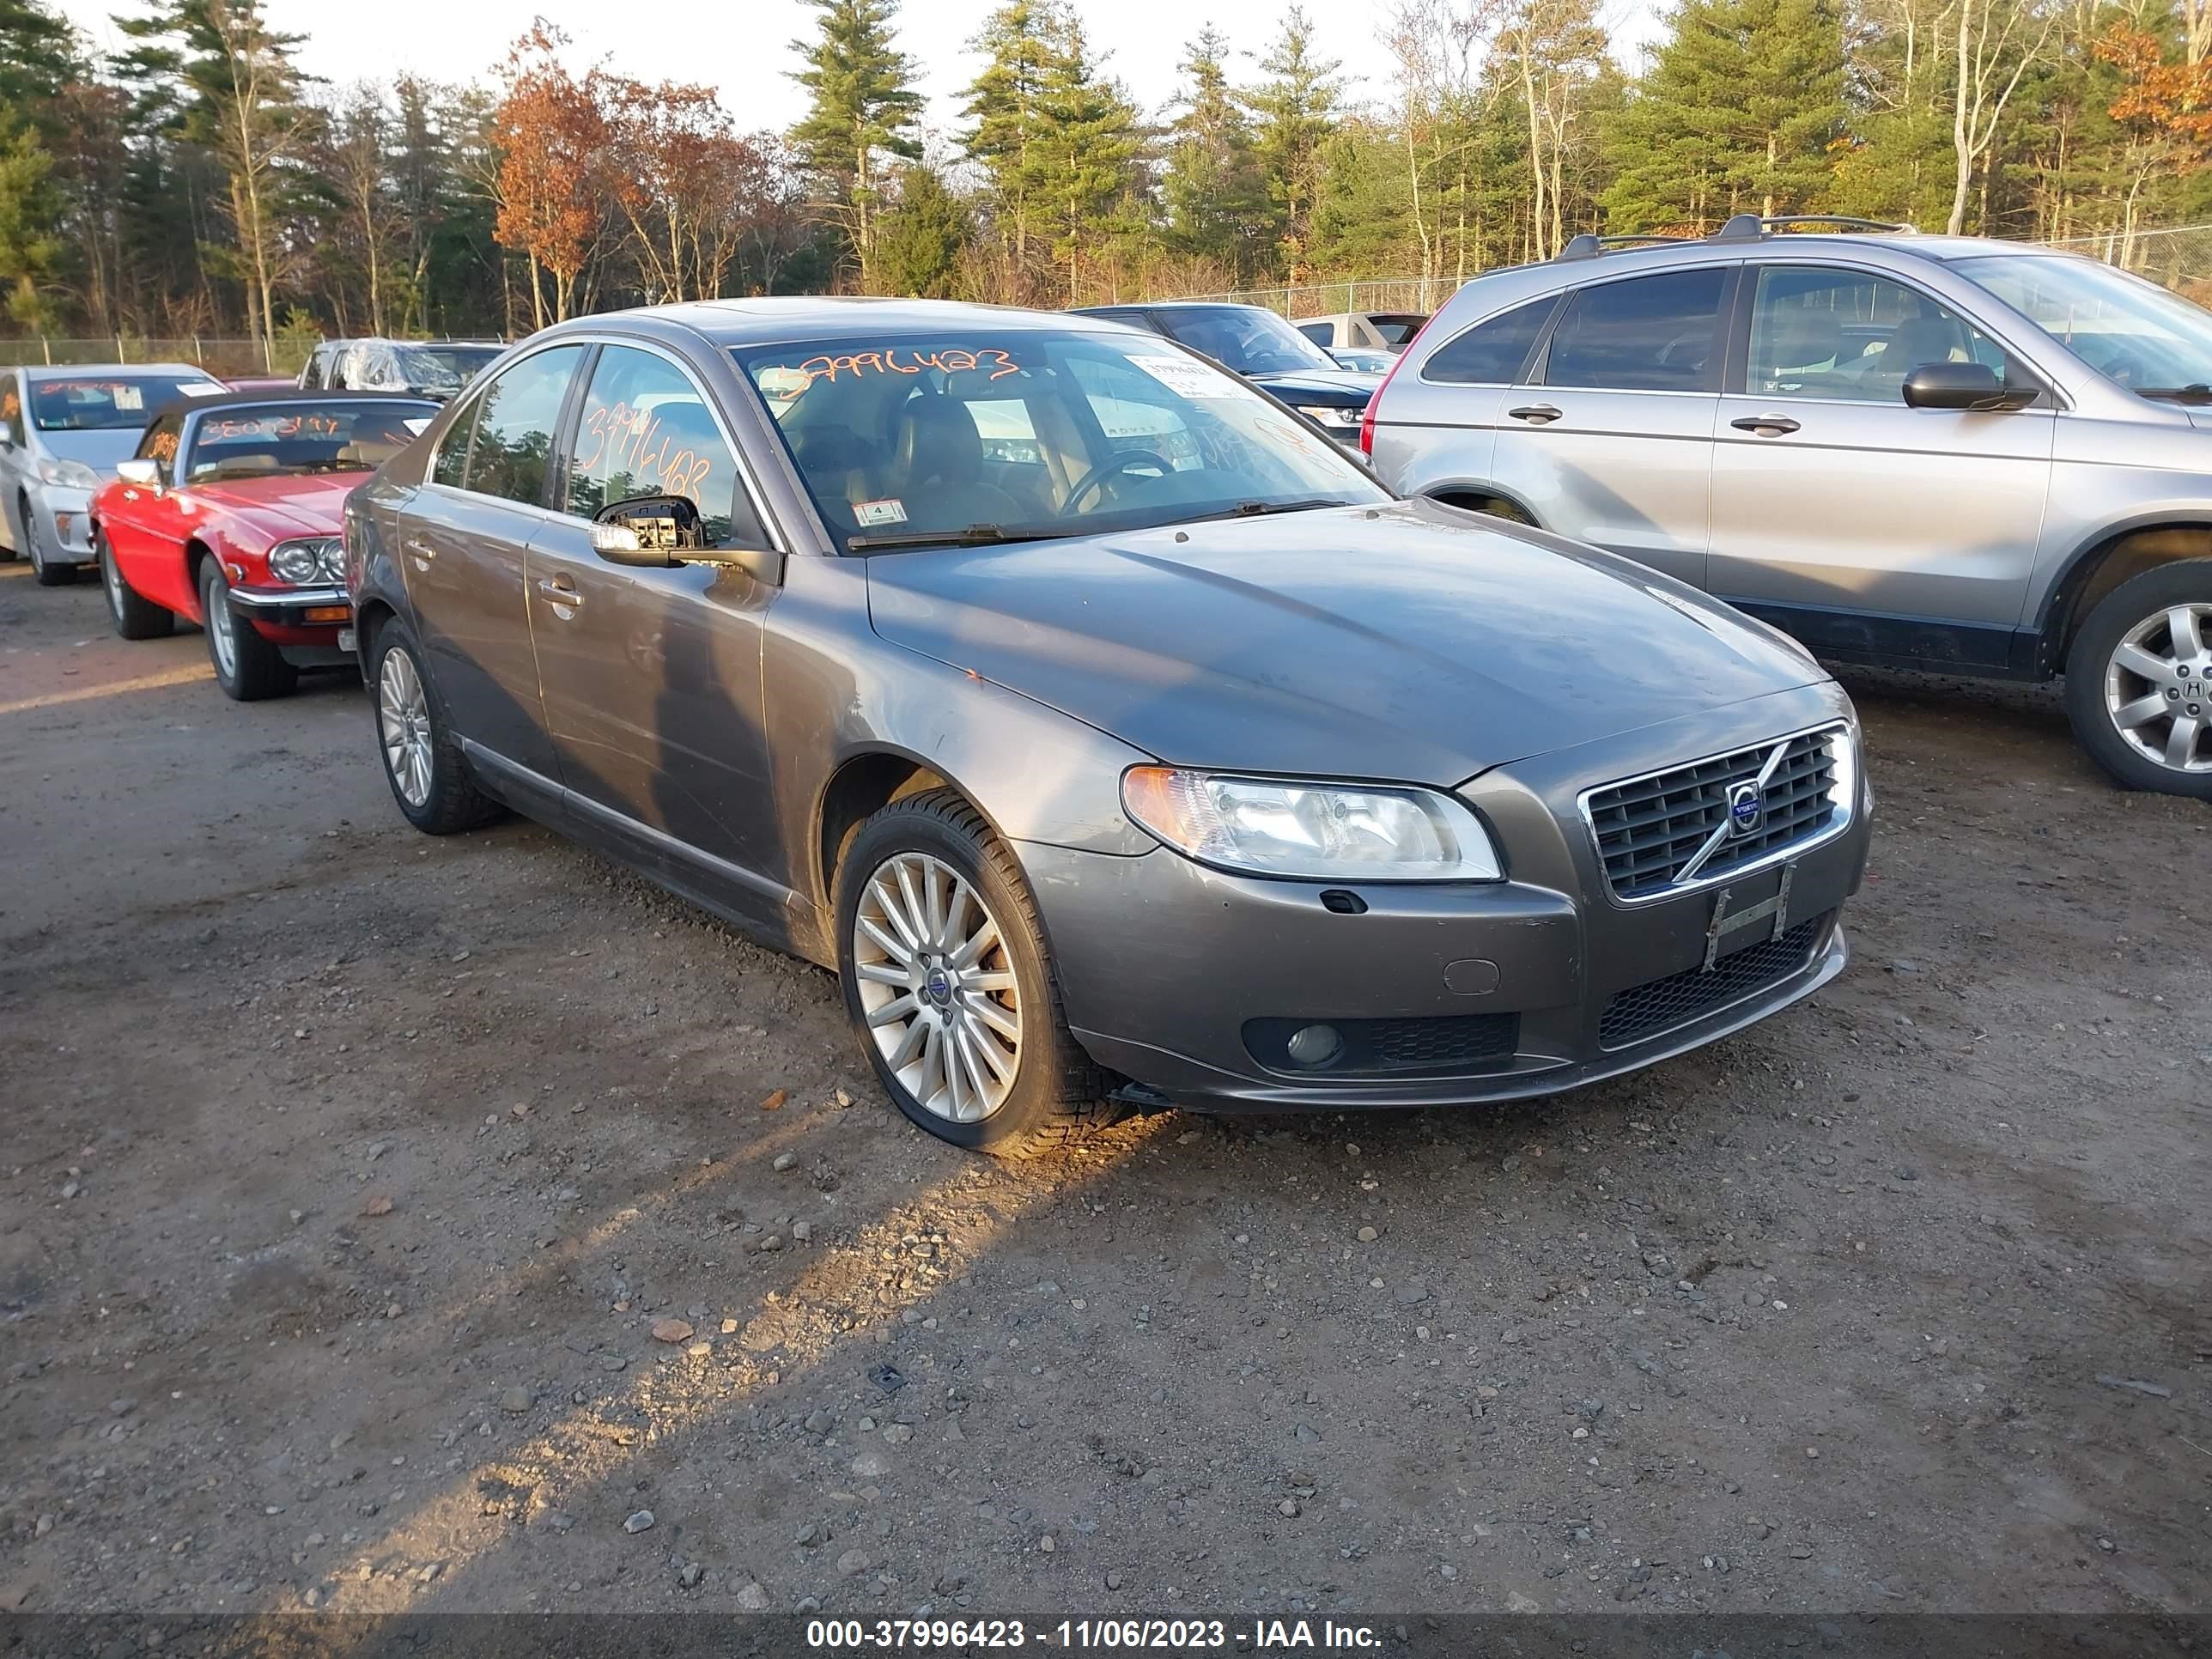 vin: YV1AS982981063350 YV1AS982981063350 2008 volvo s80 3200 for Sale in 01468, 223 Baldwinville Rd, Templeton, USA